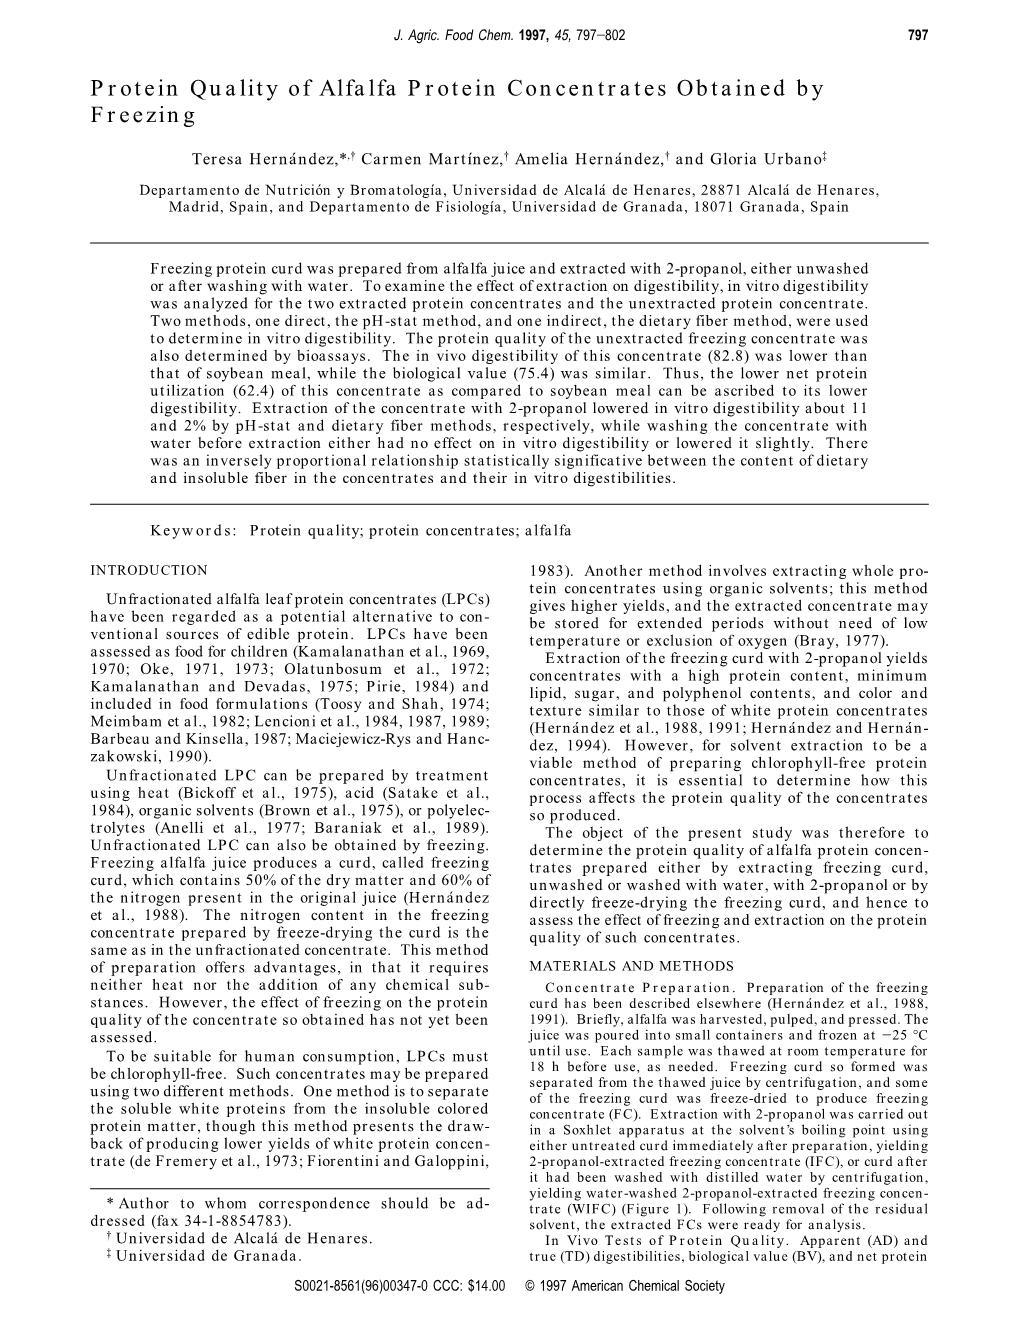 Protein Quality of Alfalfa Protein Concentrates Obtained by Freezing